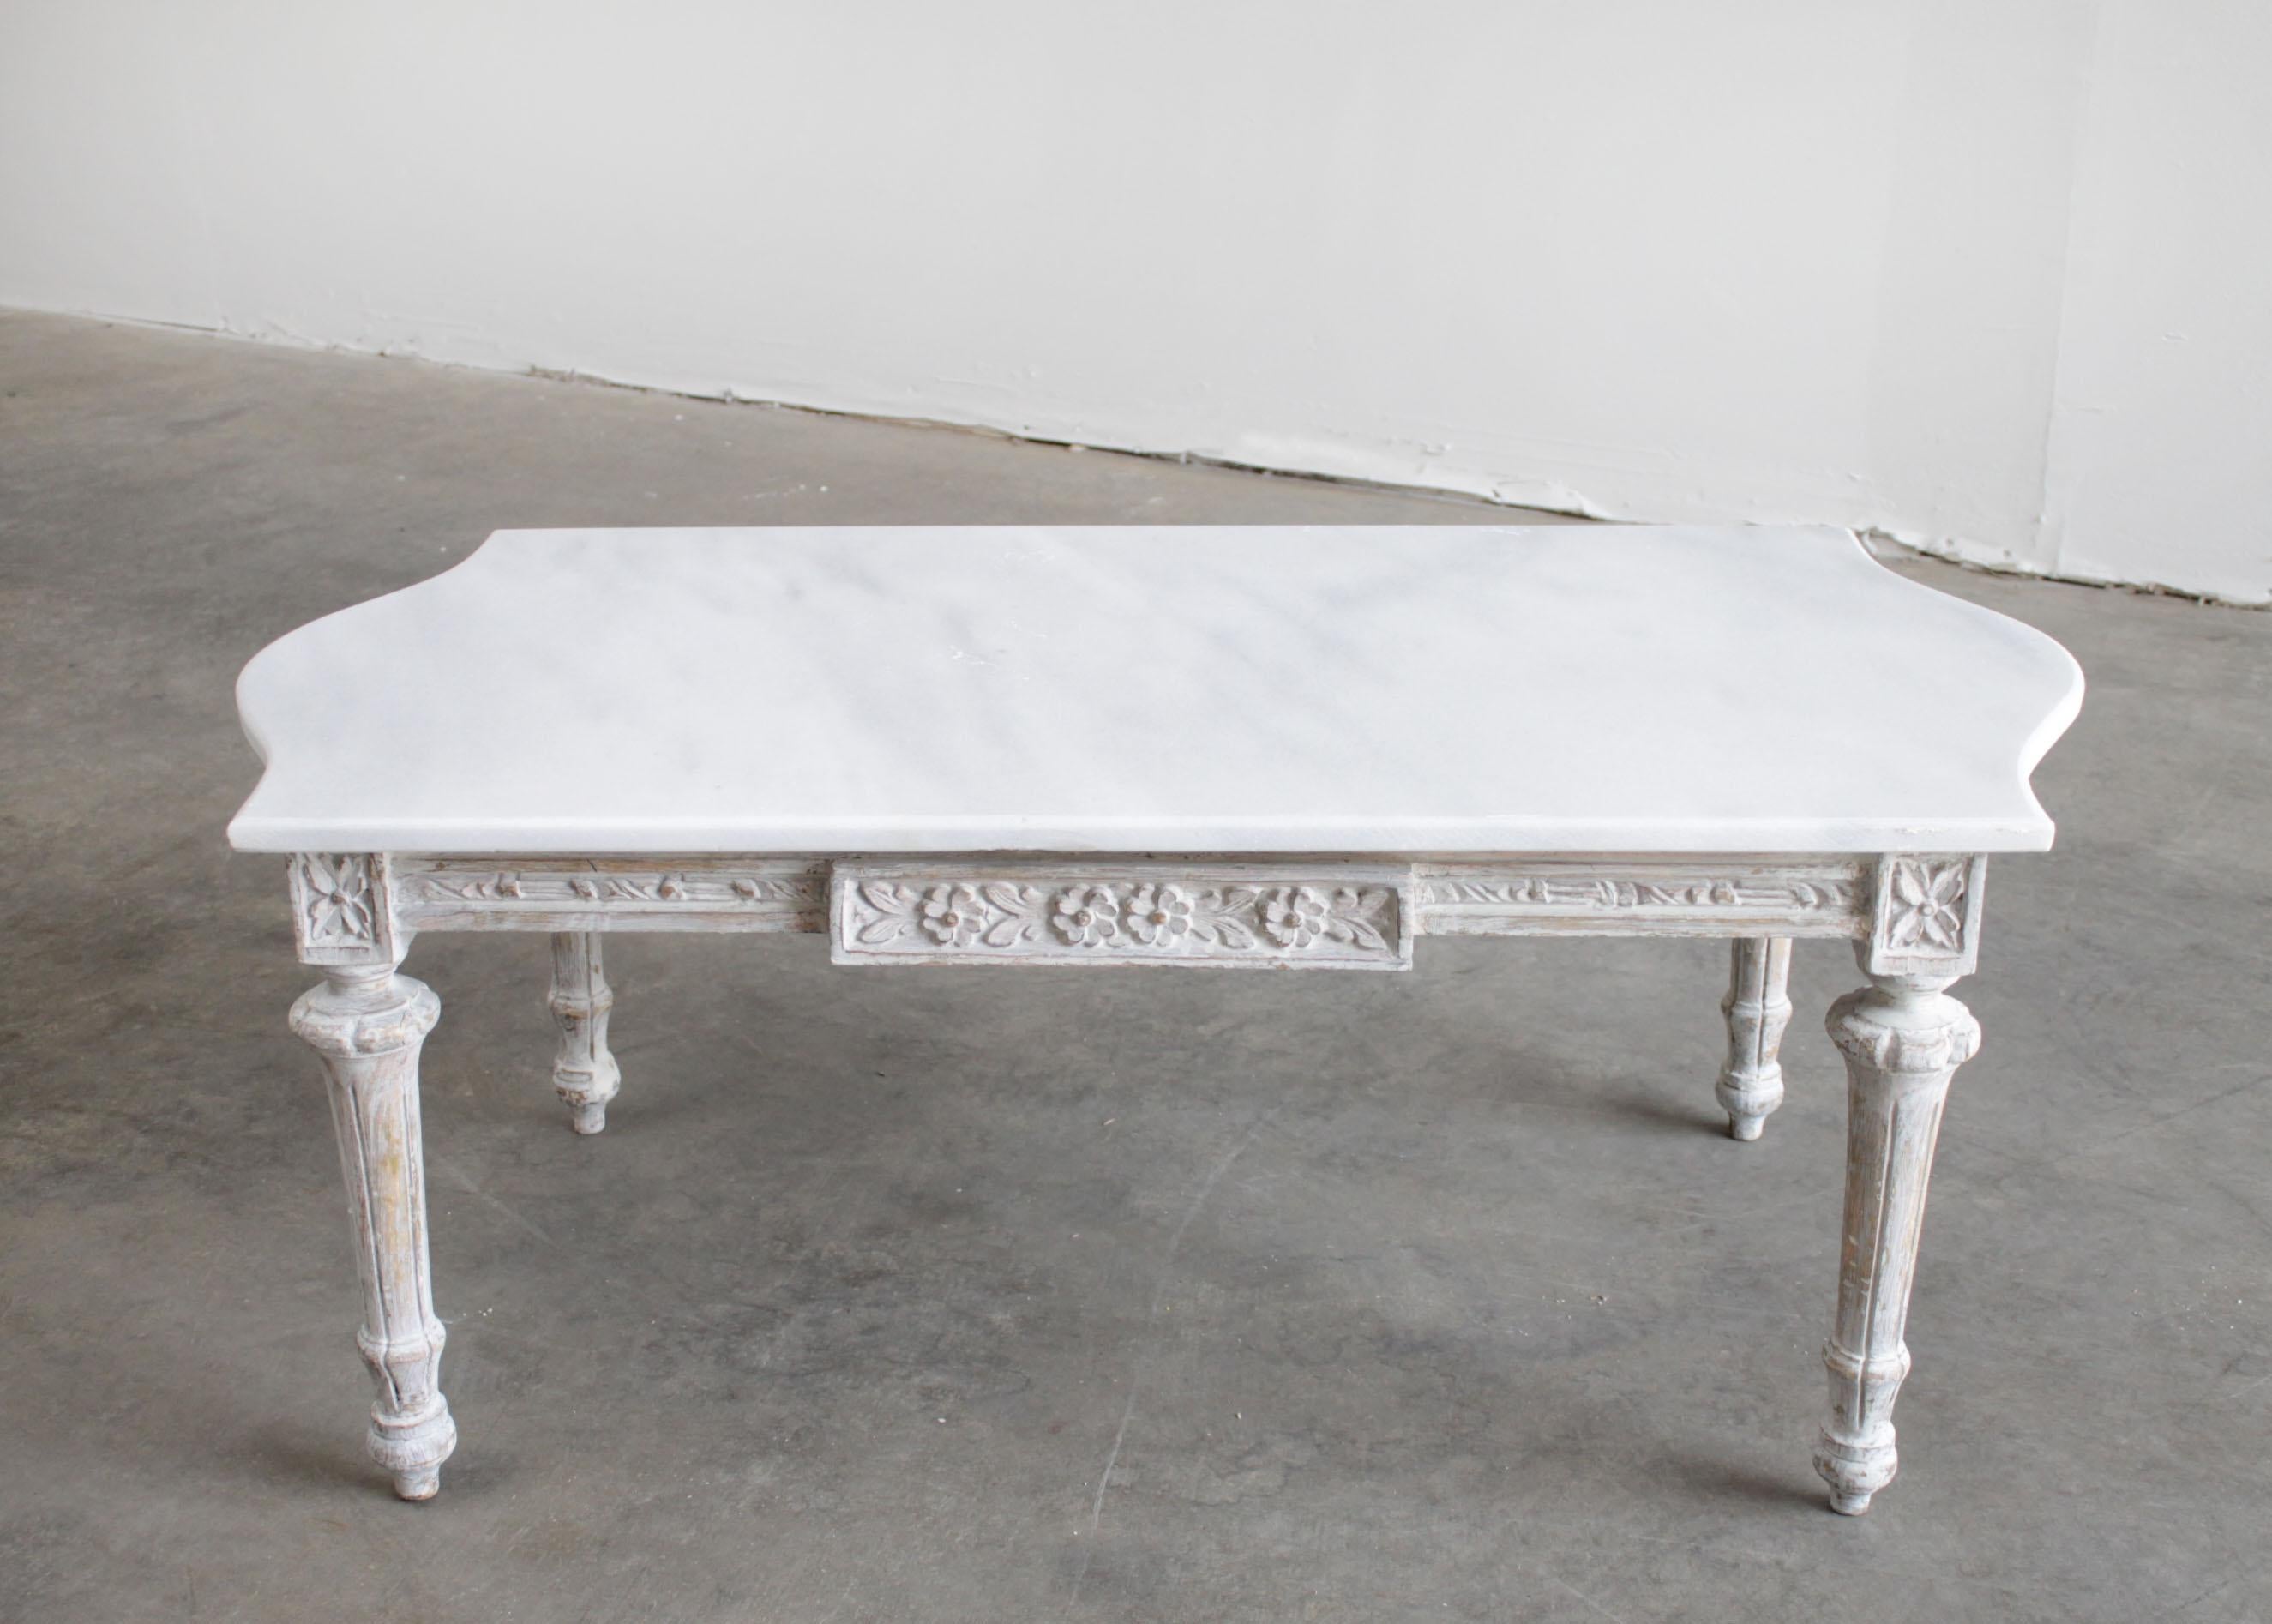 Vintage painted French Louis XVI style coffee table with marble top
Painted in a soft oyster finish, which is a grayish-white with subtle antique distressed edges.
Marble top shows signs of subtle scuffs or scratches, this is standard for all